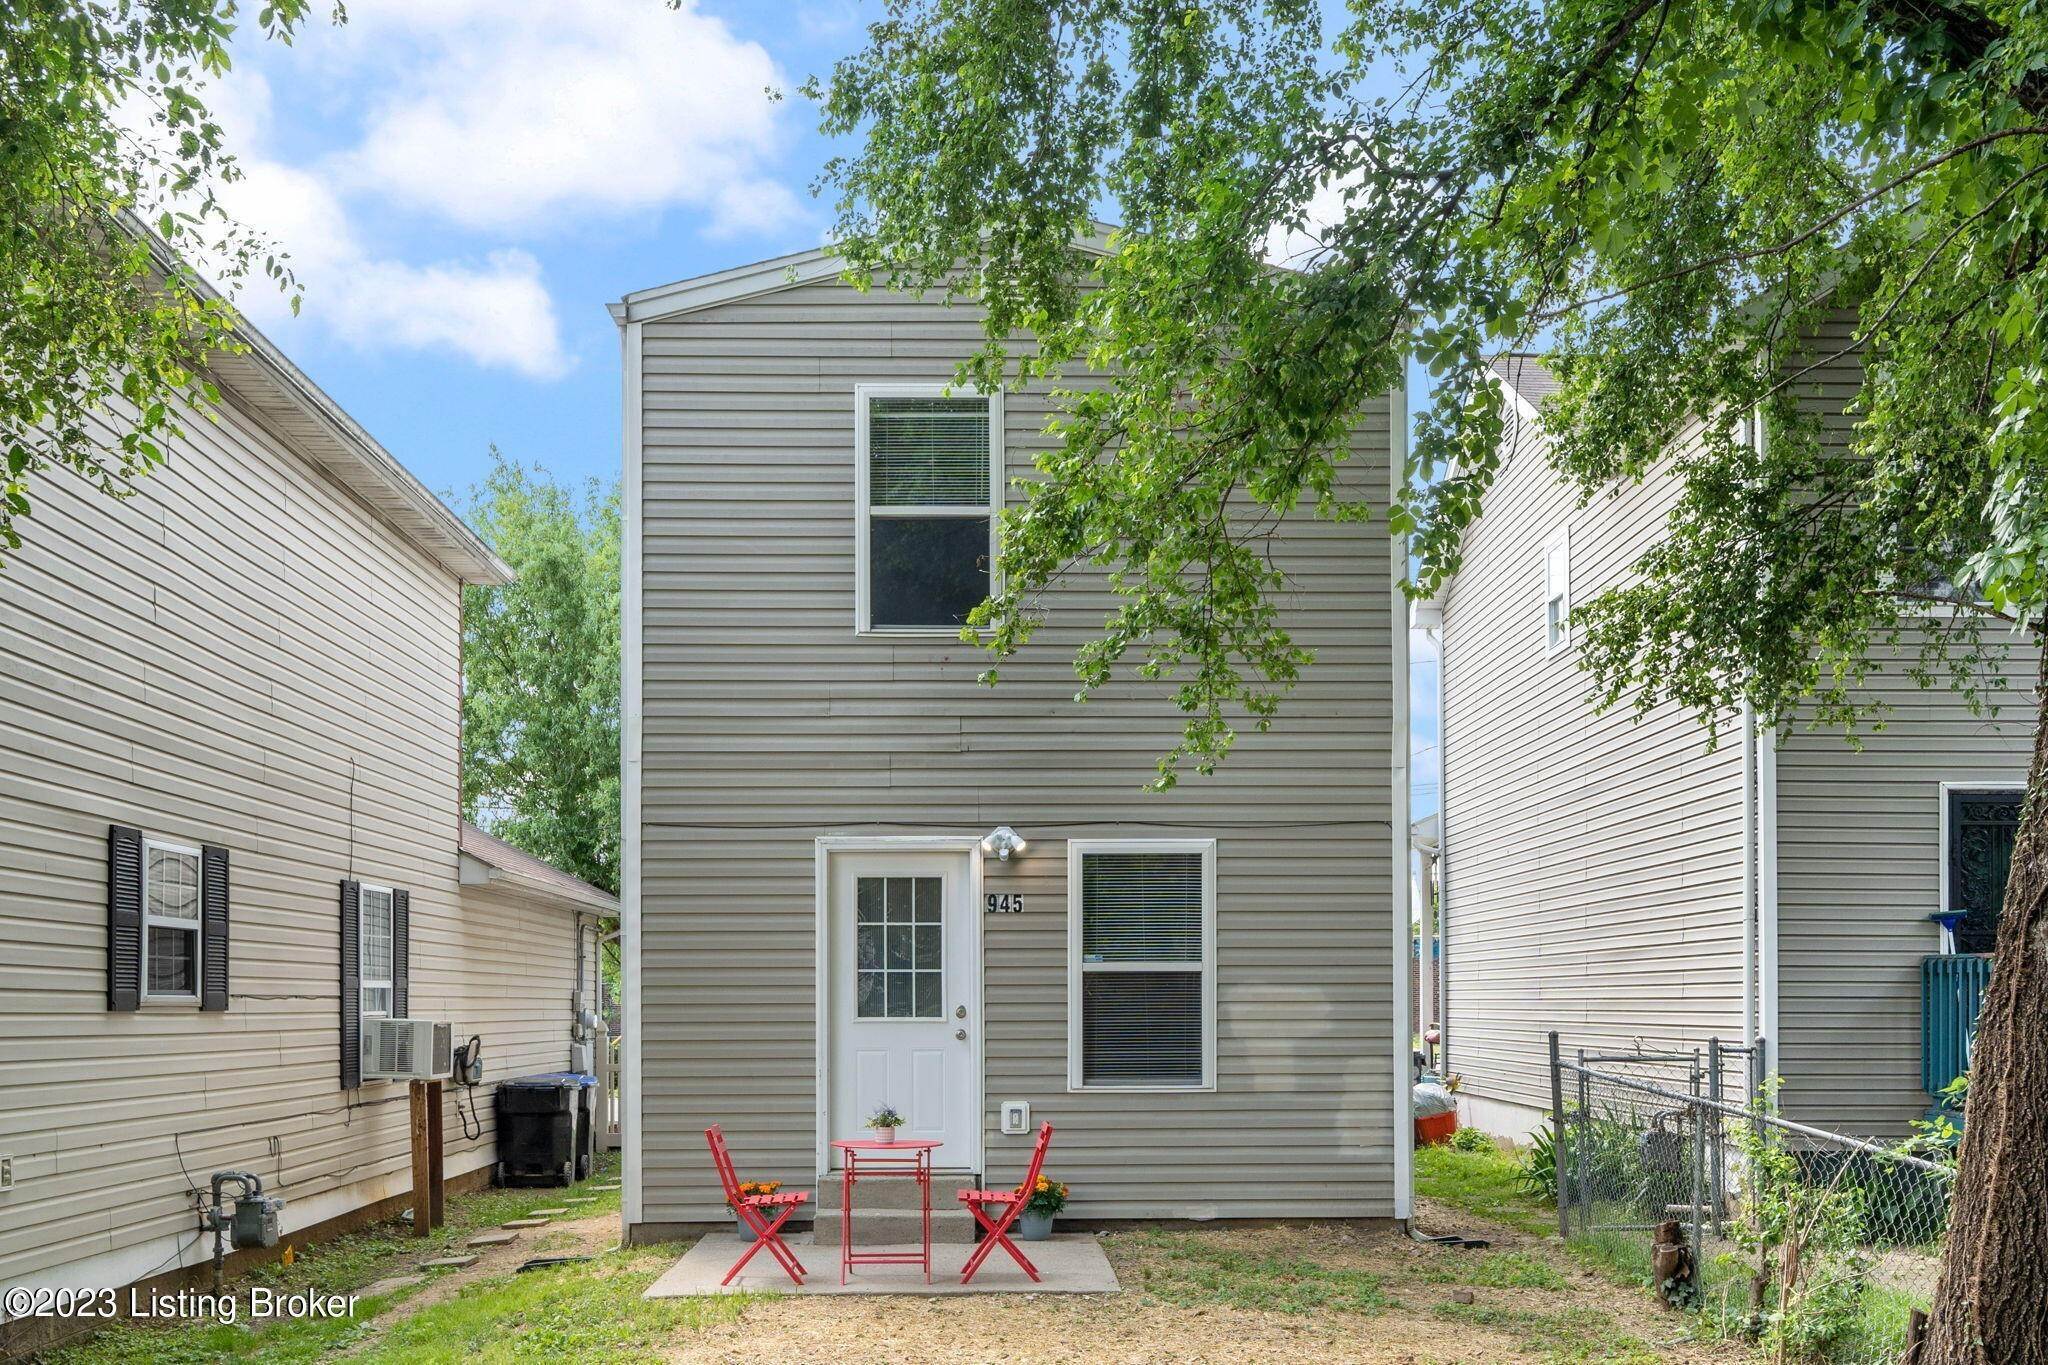 29. Single Family at Louisville, KY 40203